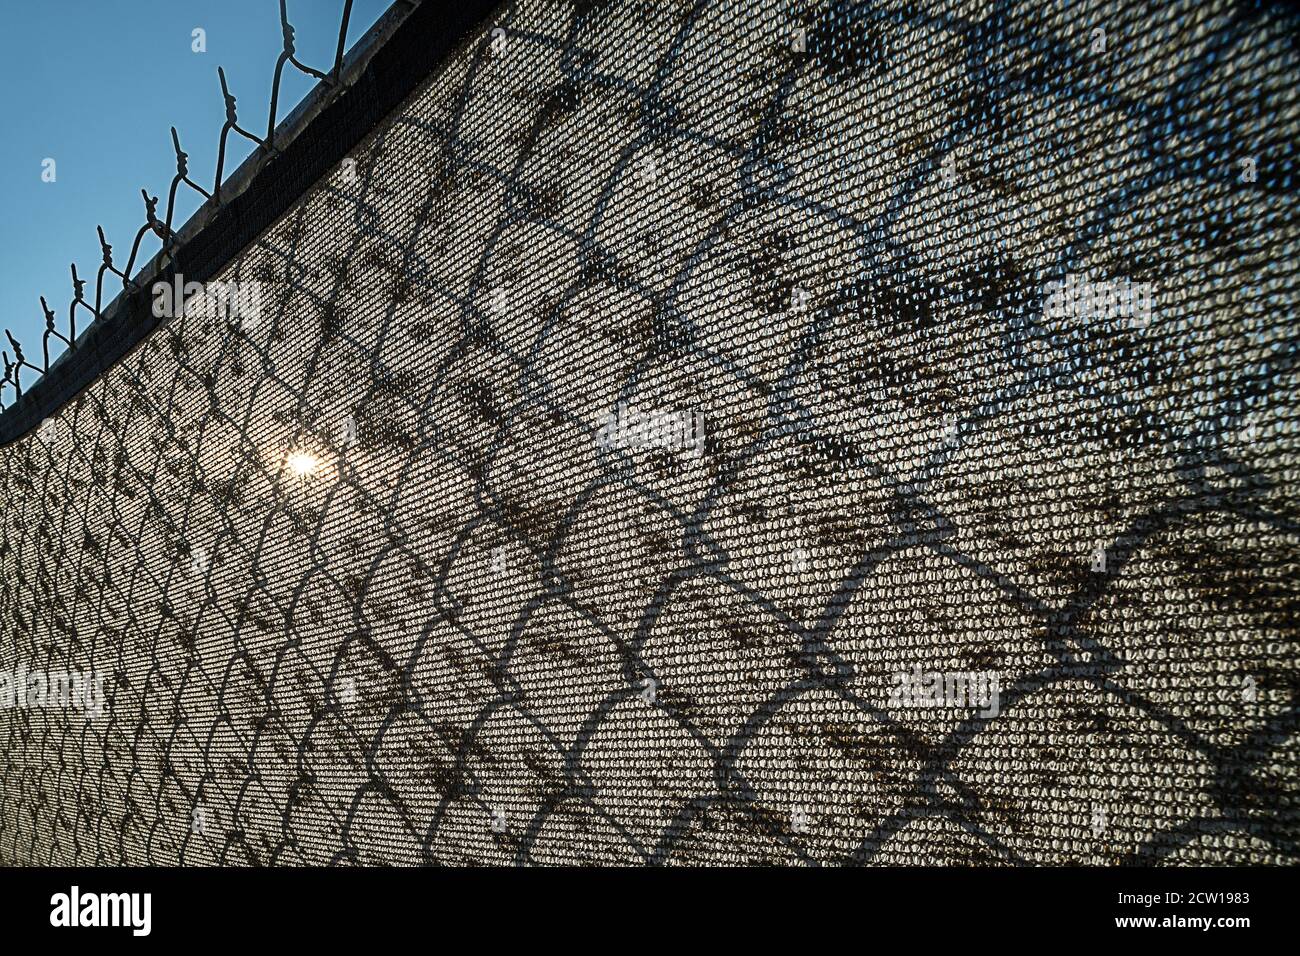 Dirty screen on chain link fence Stock Photo